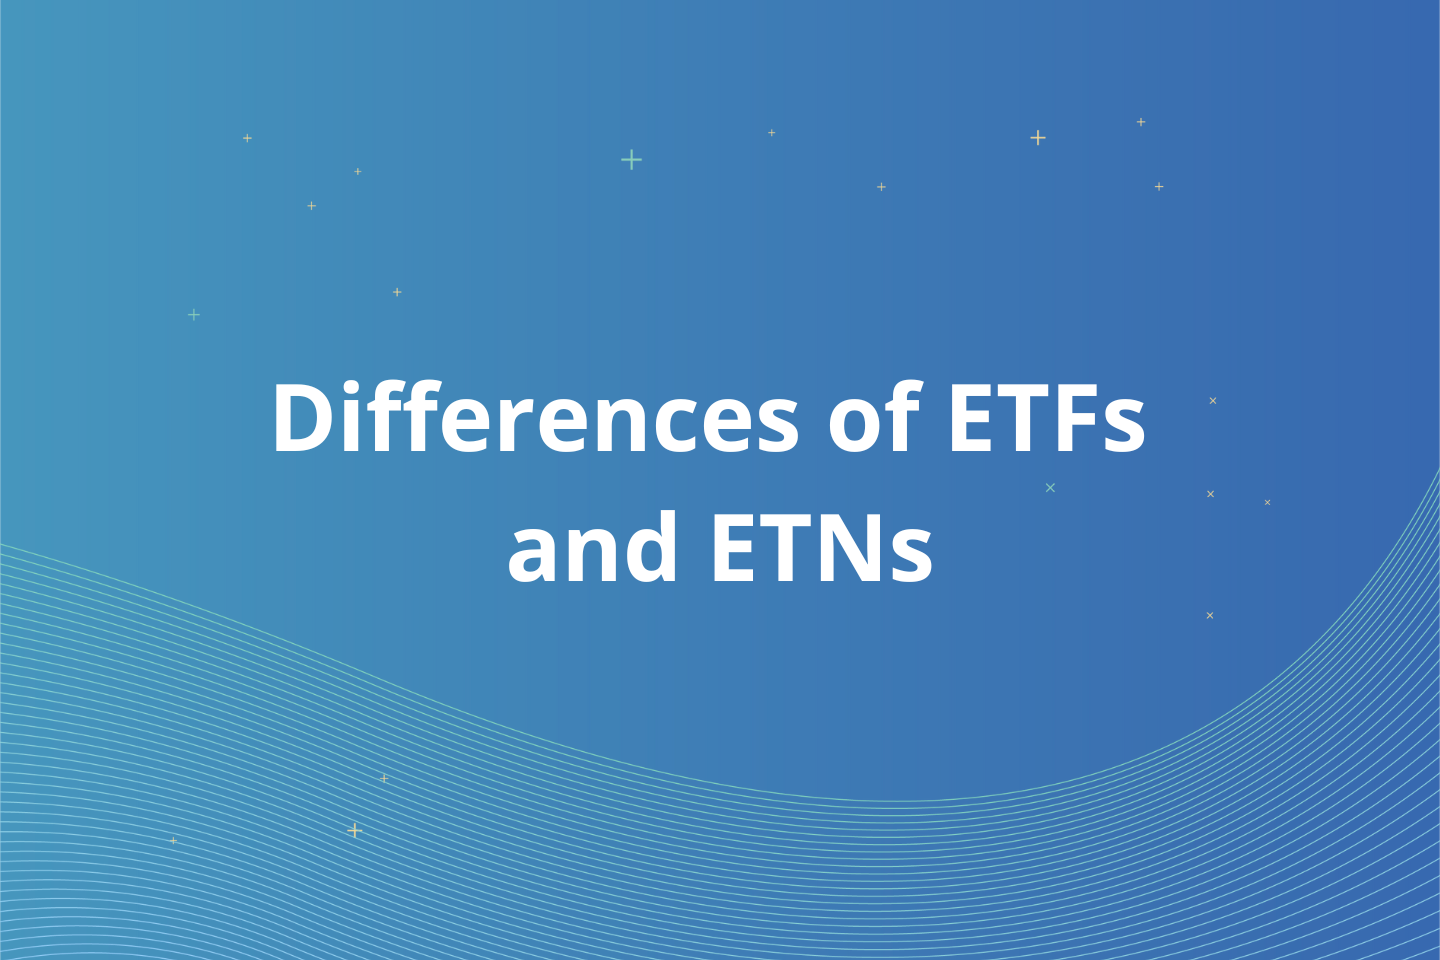 What’s the Difference Between ETFs and ETNs?